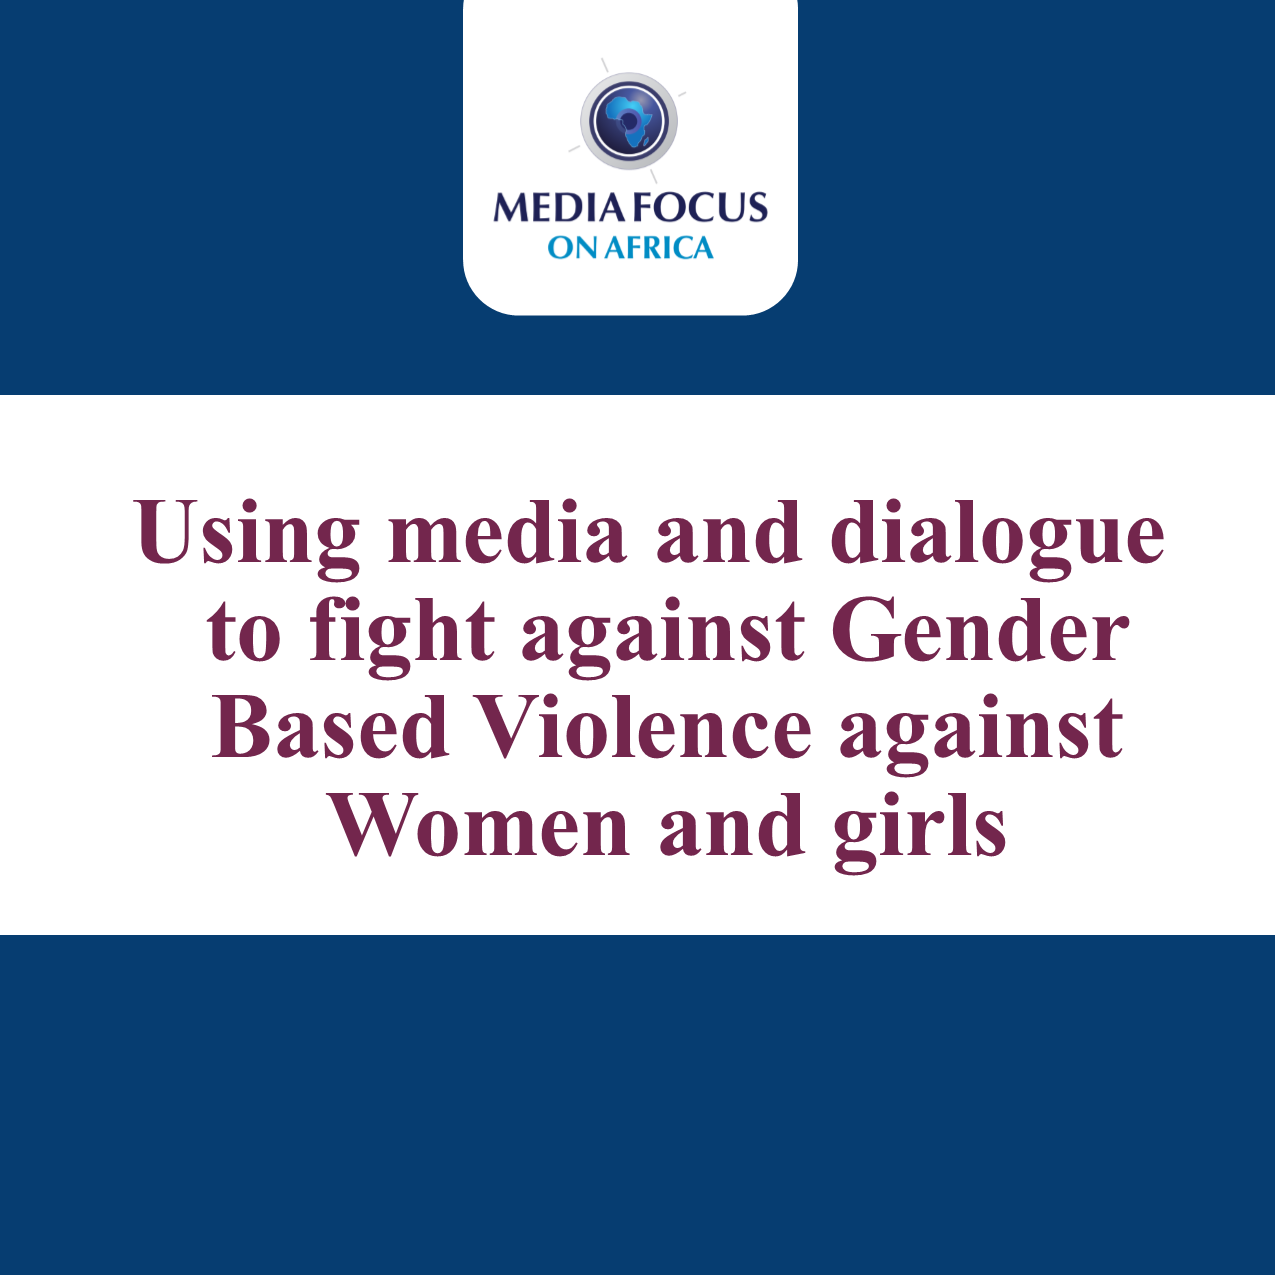 Using media and dialogue to fight against Gender Based Violence against Women and girls.